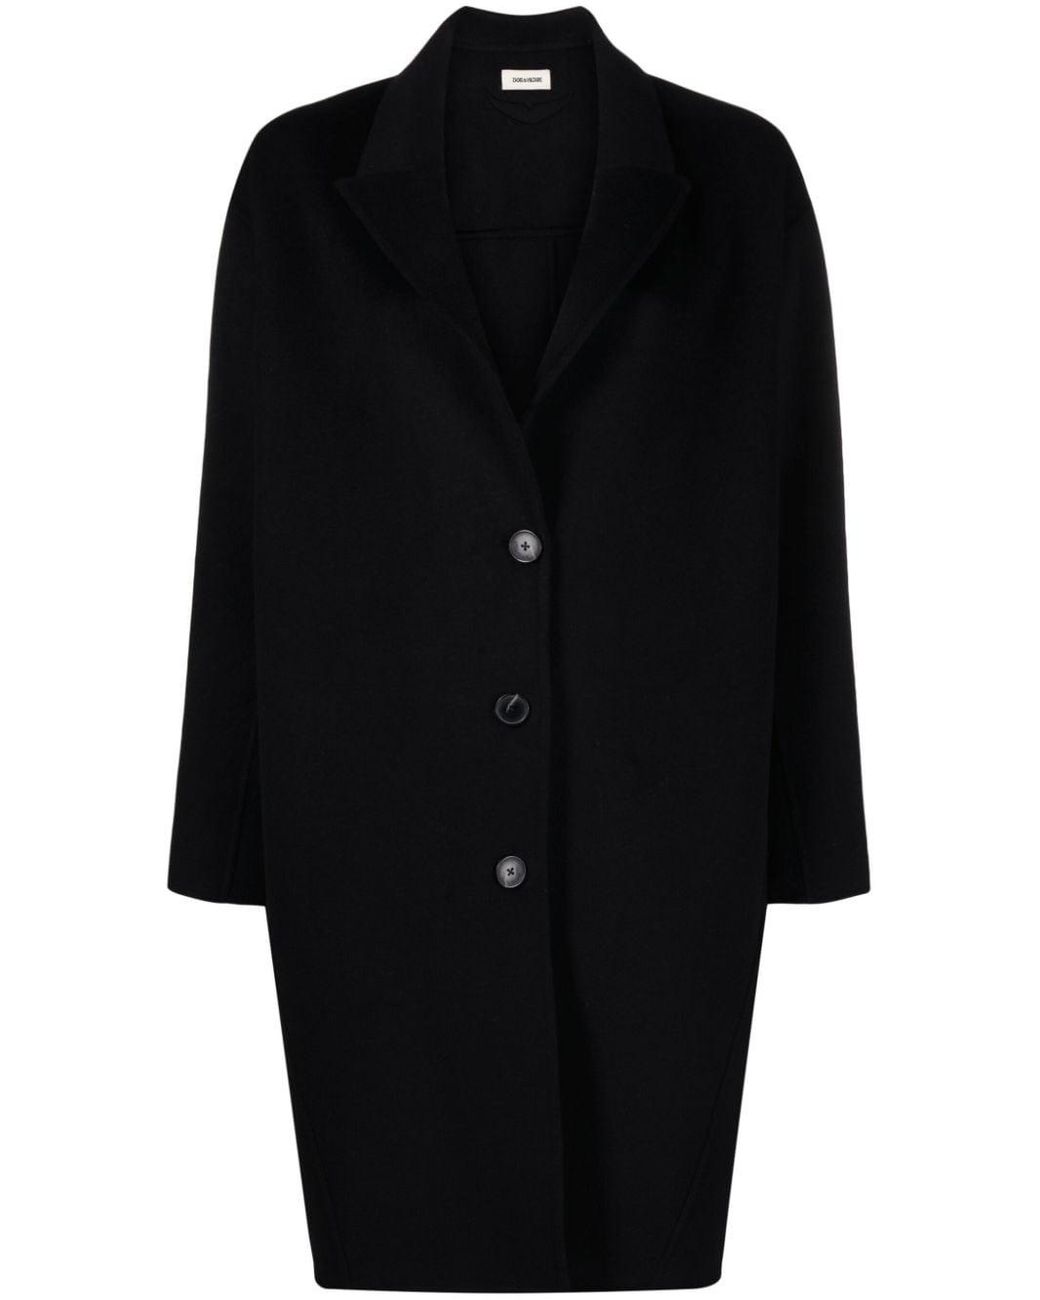 Zadig & Voltaire Mady Wool-blend Coat in Black | Lyst